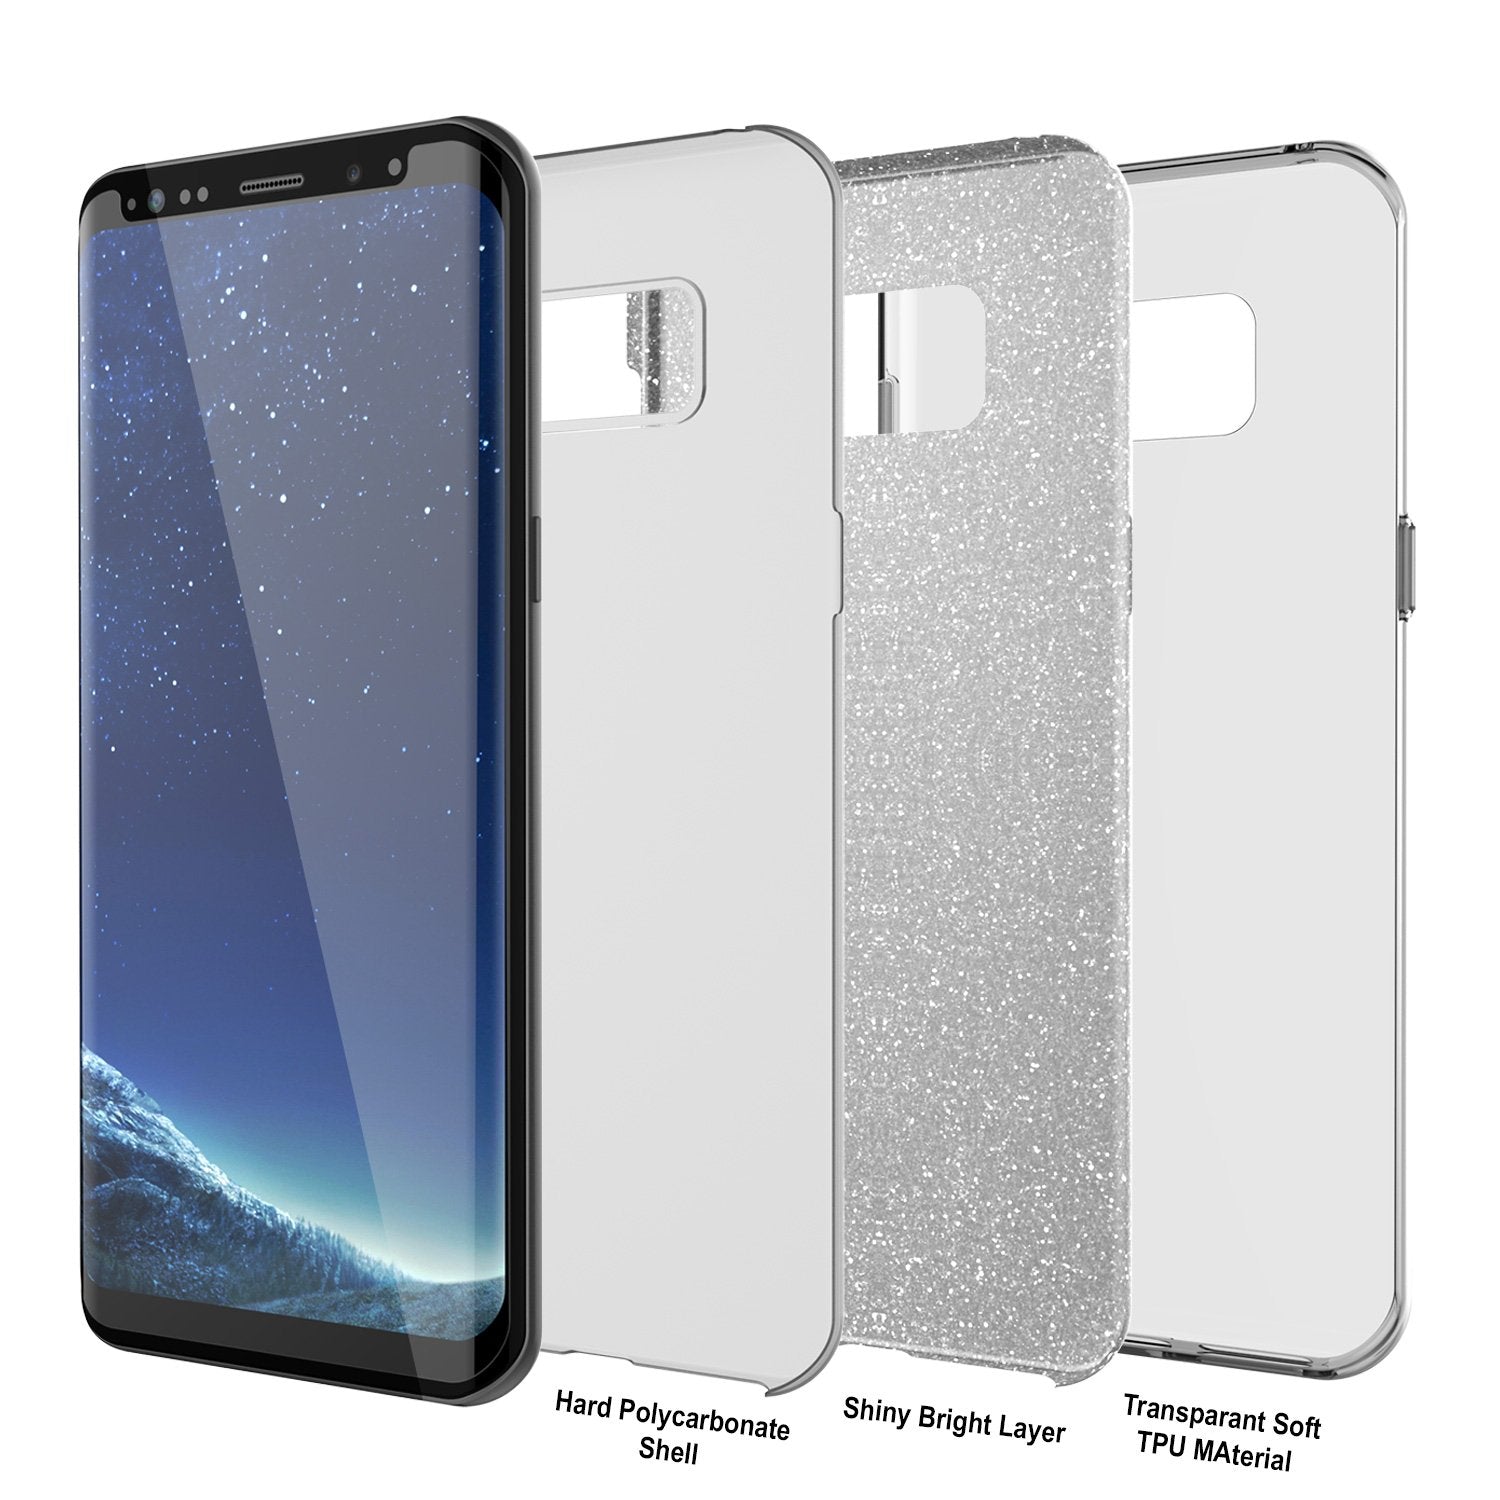 Galaxy S8 Plus Case, Punkcase Galactic 2.0 Series Ultra Slim Protective Armor TPU Cover [Silver] - PunkCase NZ